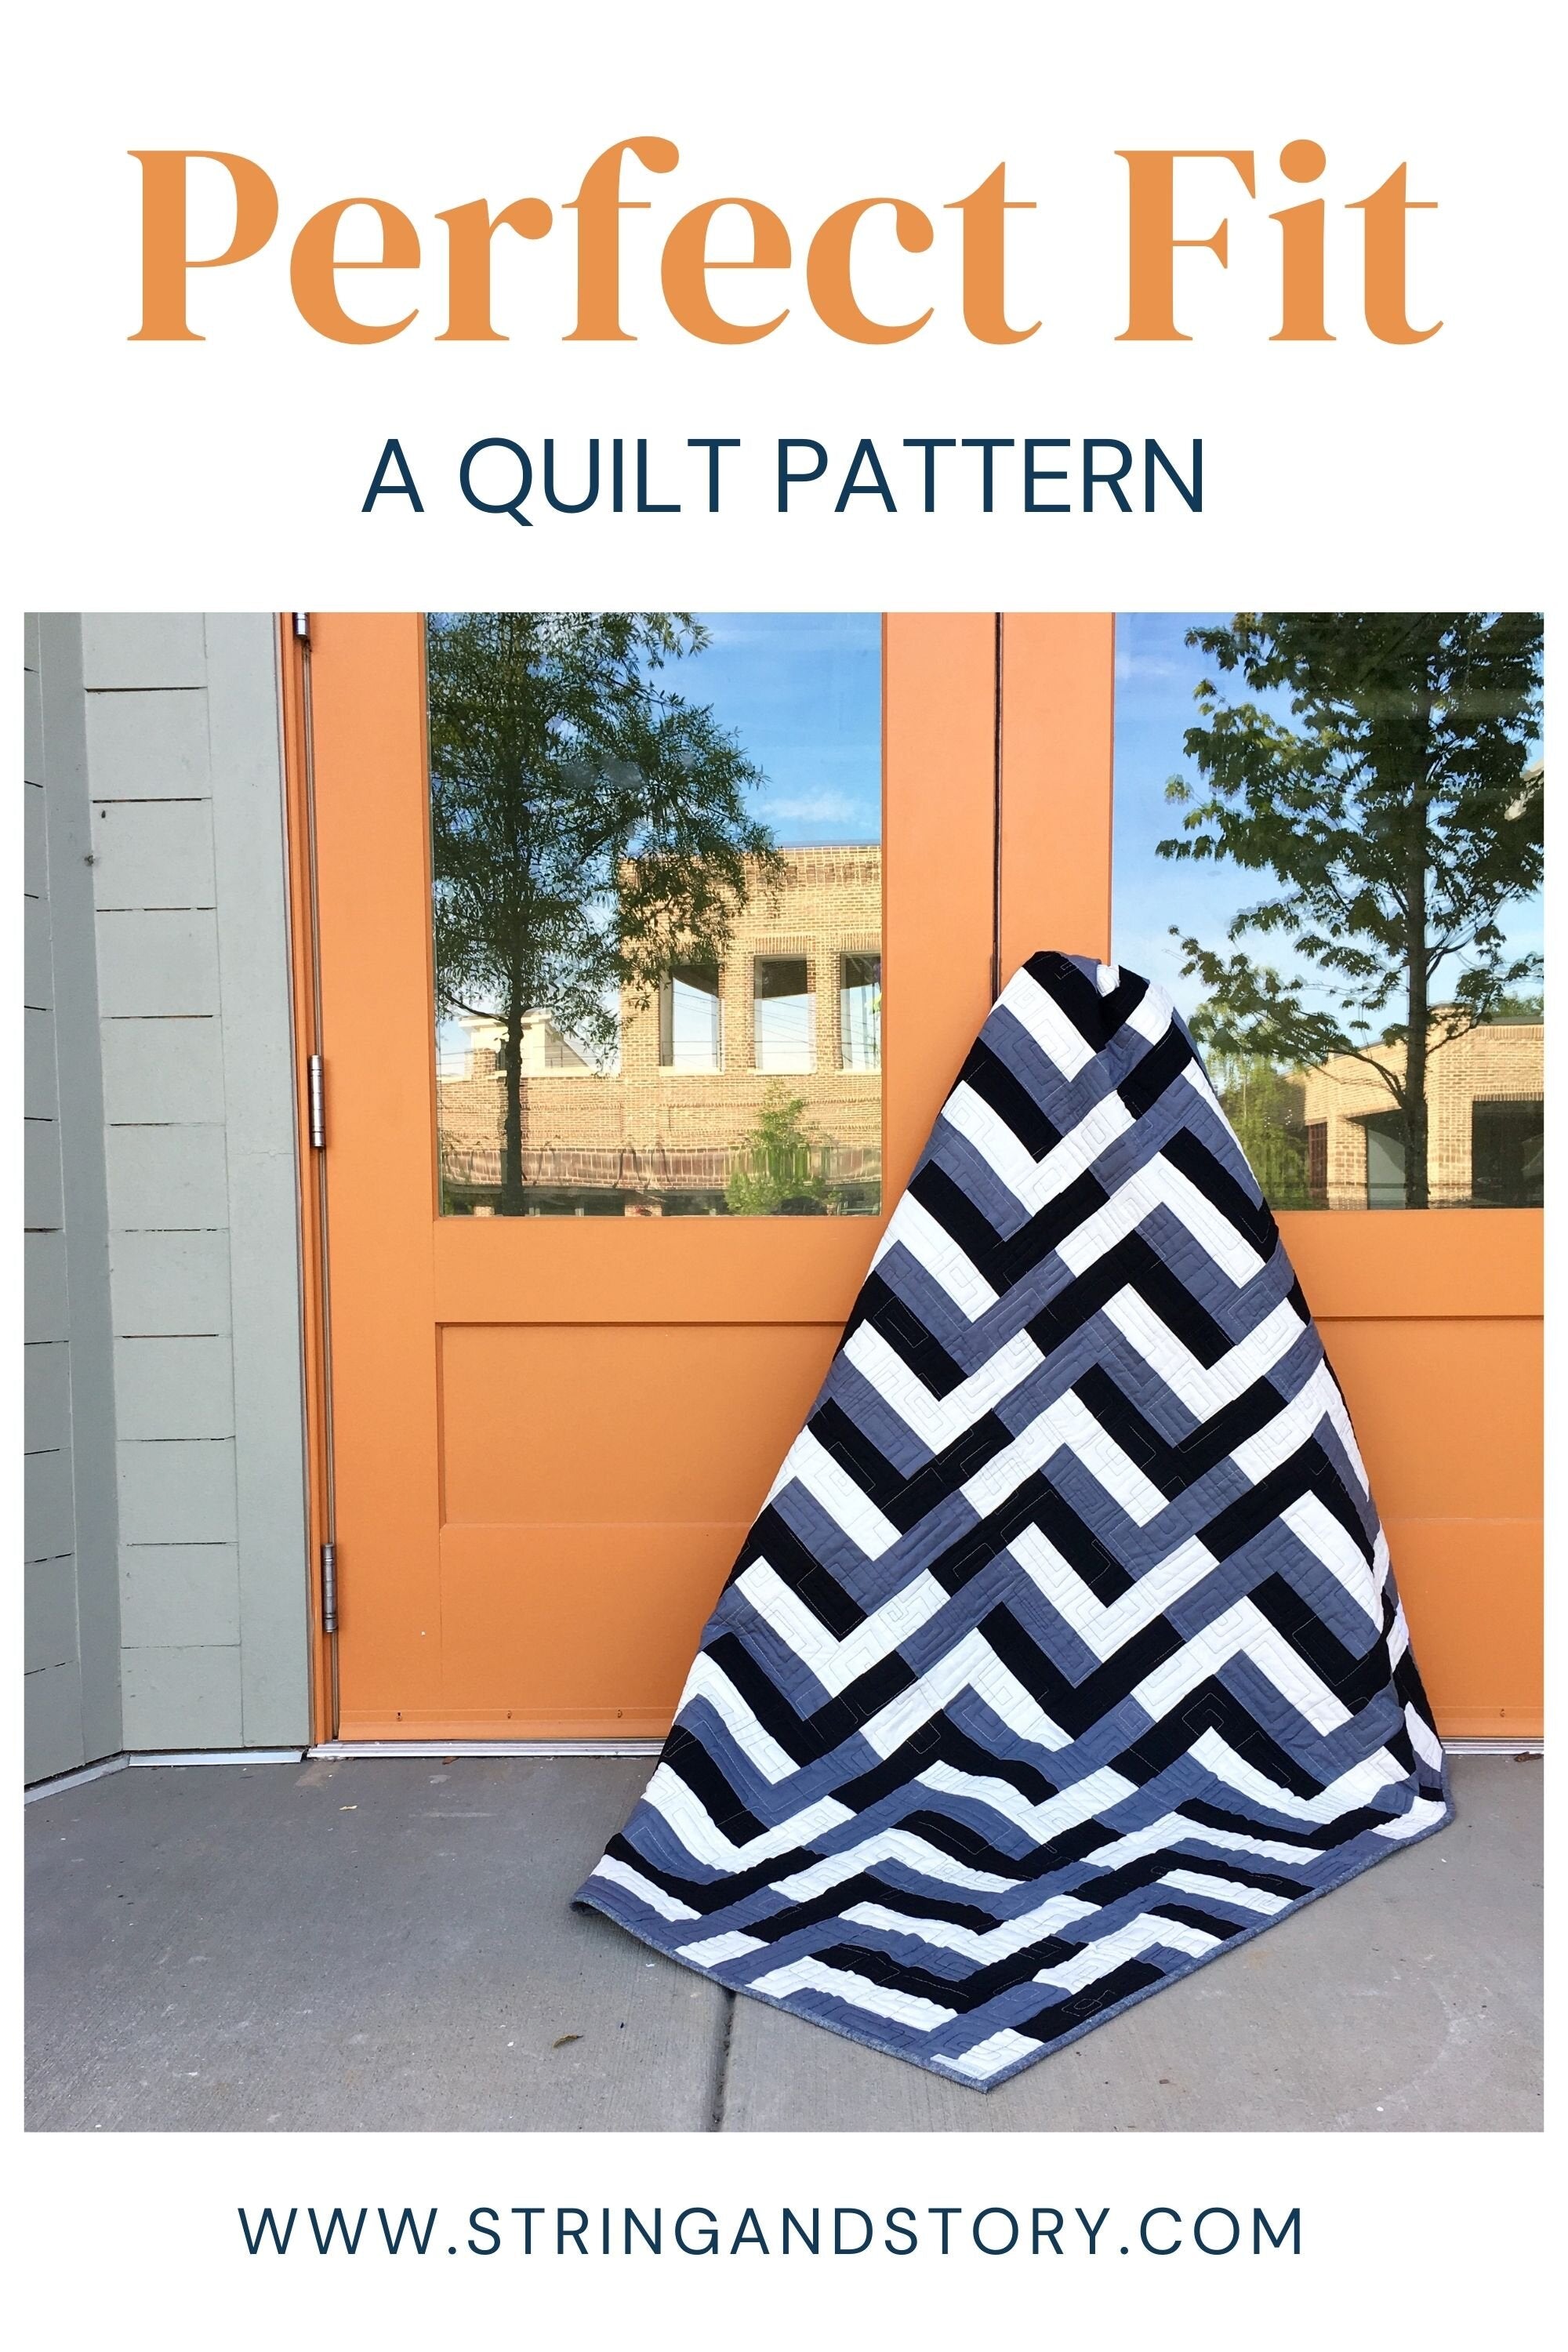 Patterns: Perfect Fit Quilt - DIGITAL PATTERN by HollyAnne Knight for String & Story